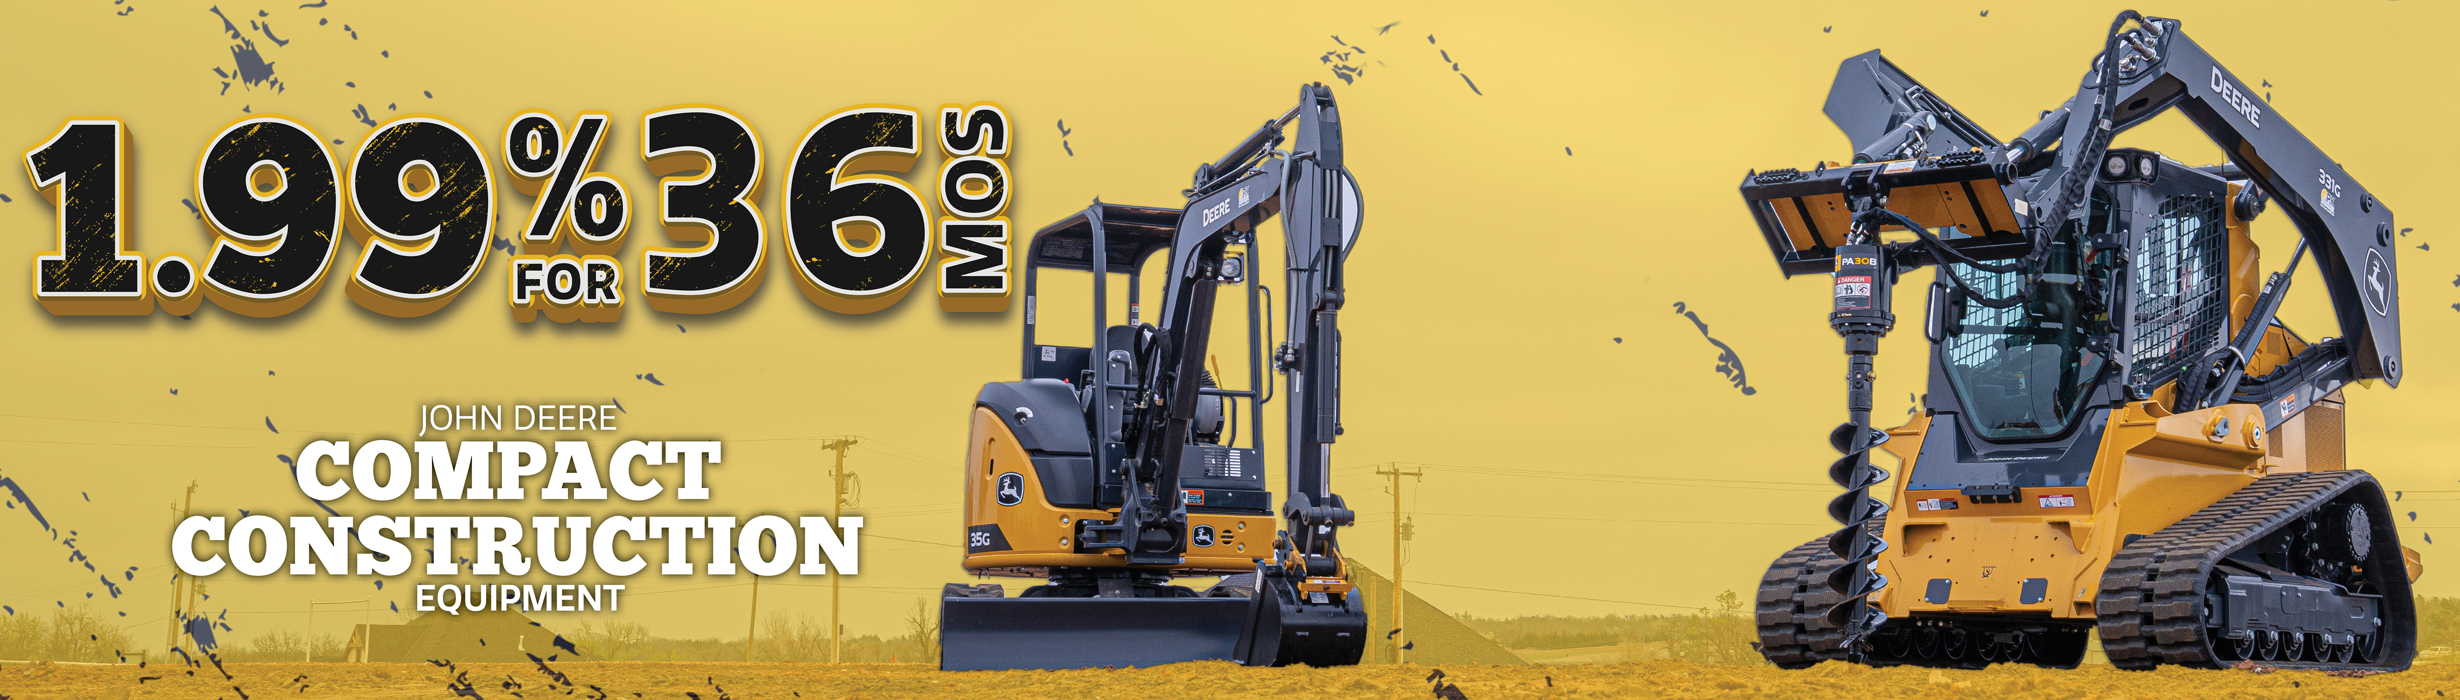 Don't miss 1.99% for 36 mos on Compact Construction Equipment